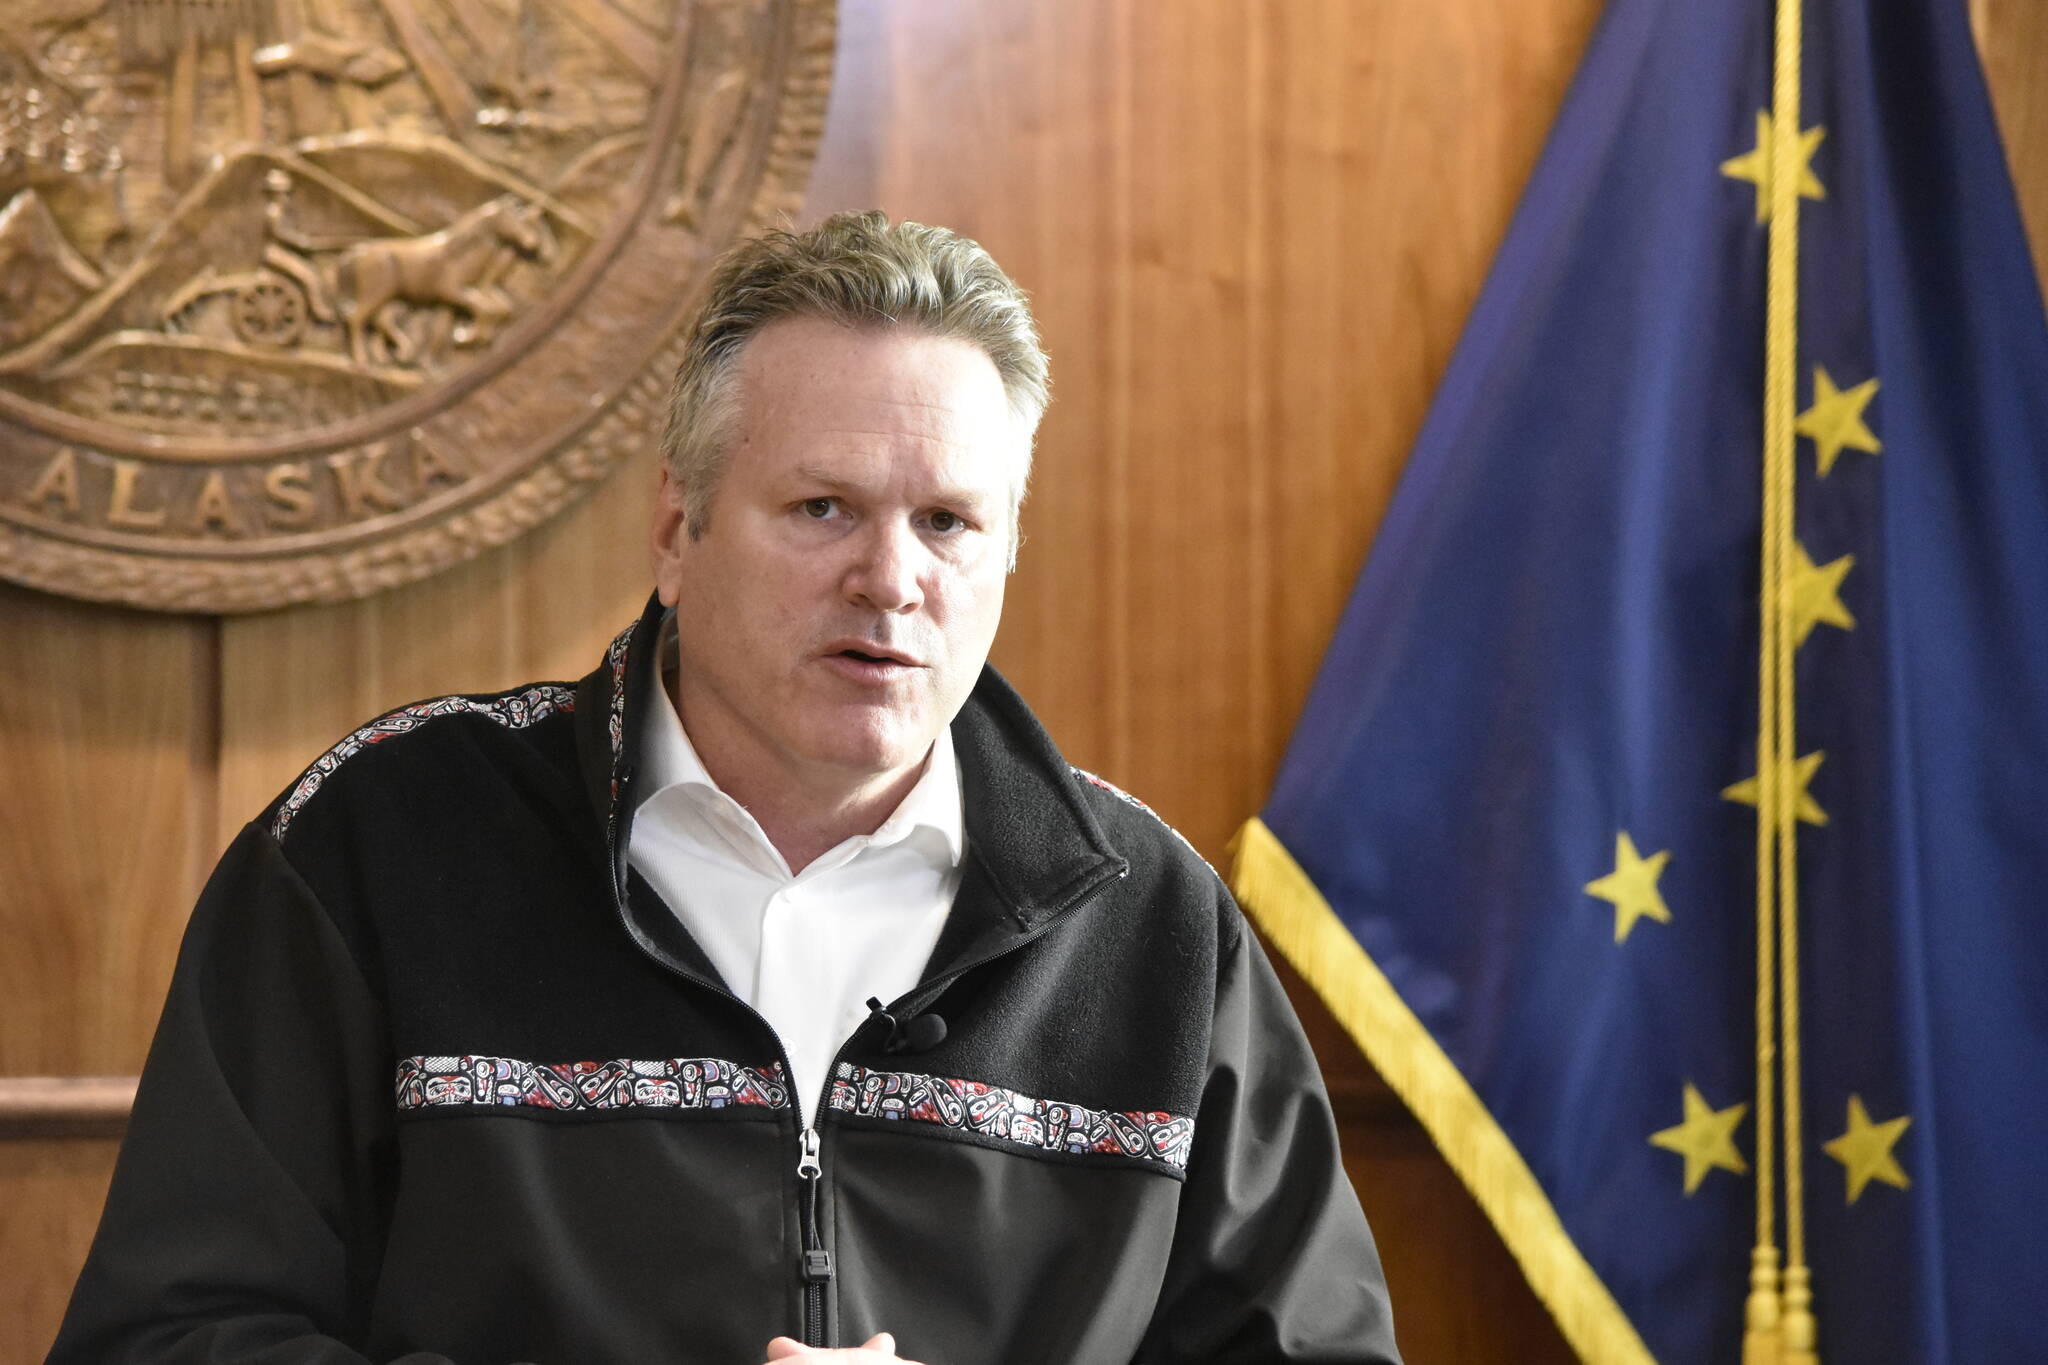 Gov. Mike Dunleavy criticized state lawmakers at a news conference at the Alaska State Capitol on Thursday, Oct. 28, 2022, for the lack of progress made during the fourth special session of the year. Dunleavy had called lawmakers to Juneau to work towards resolving the state’s long term fiscal issues but deep divisions stalled work. (Peter Segall / Juneau Empire)